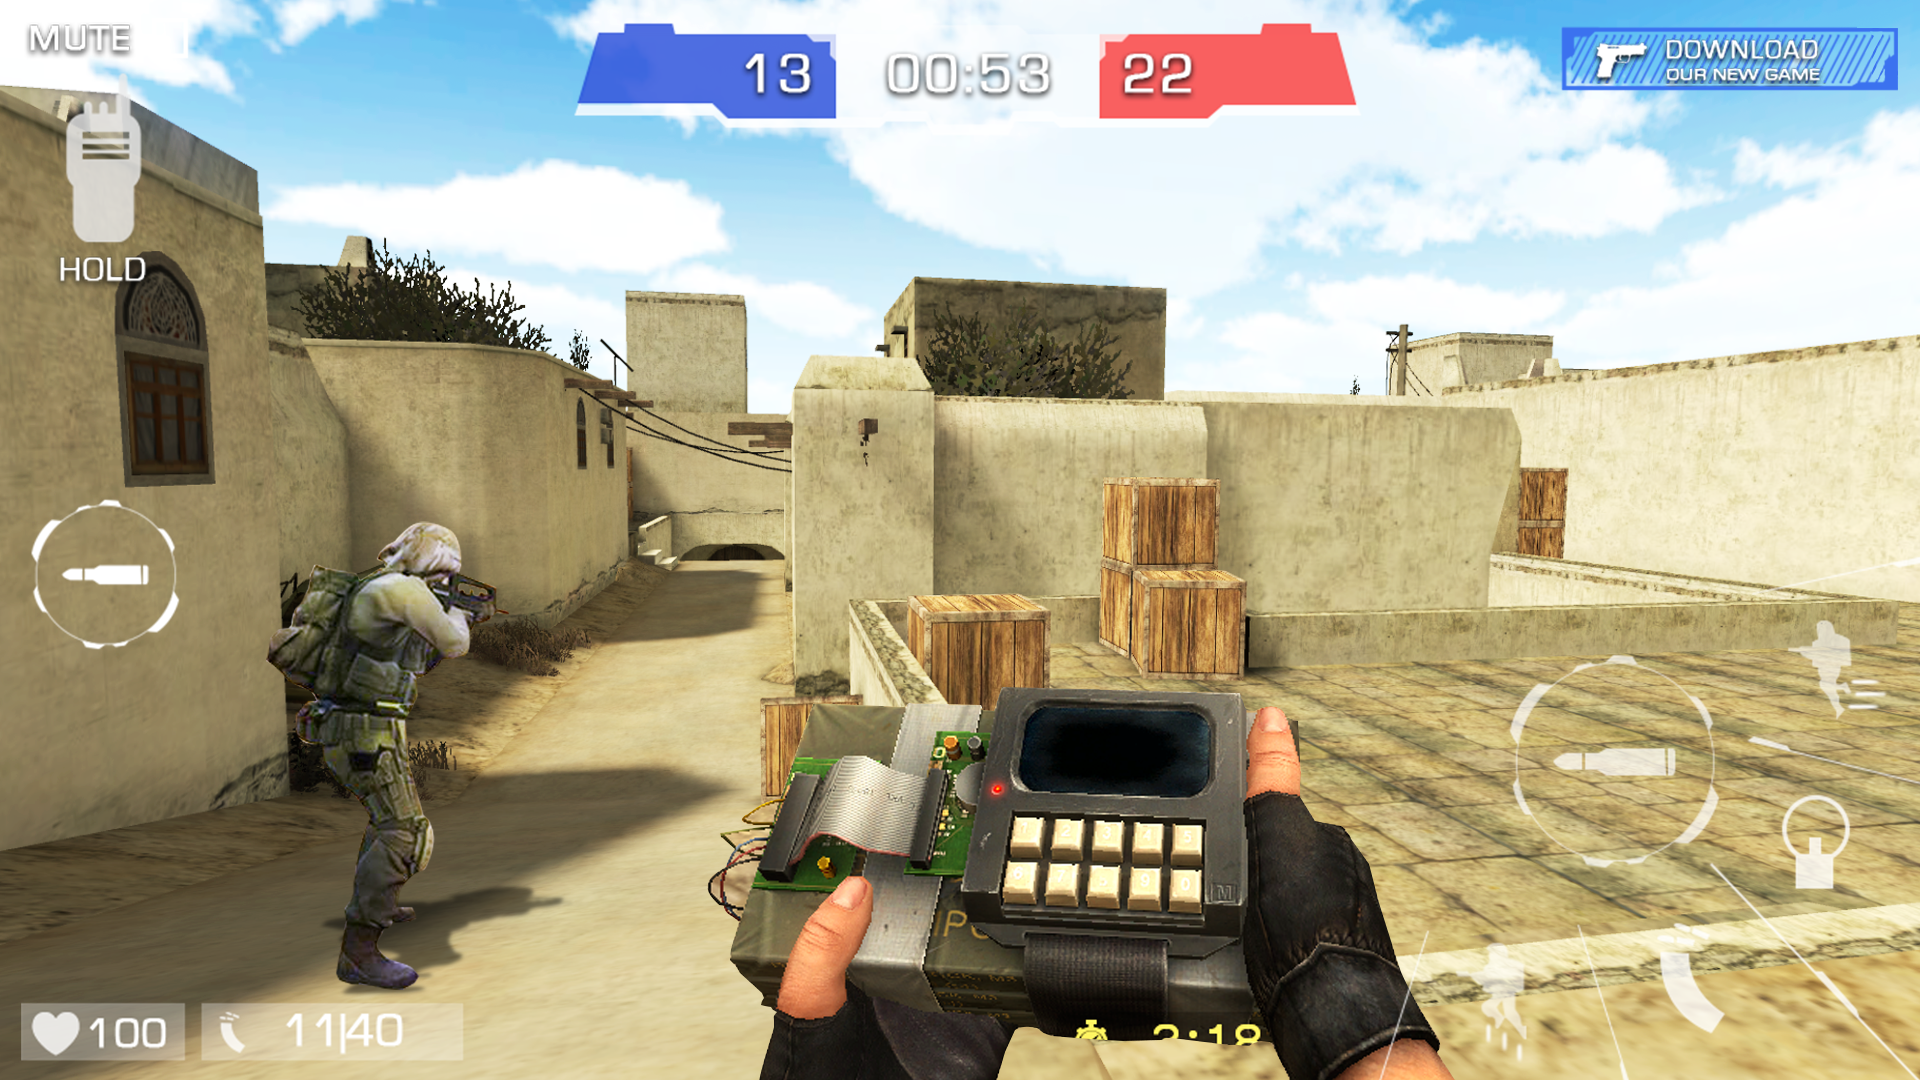 Download Enjoy hours of intense gaming on Counter-Strike Global Offensive